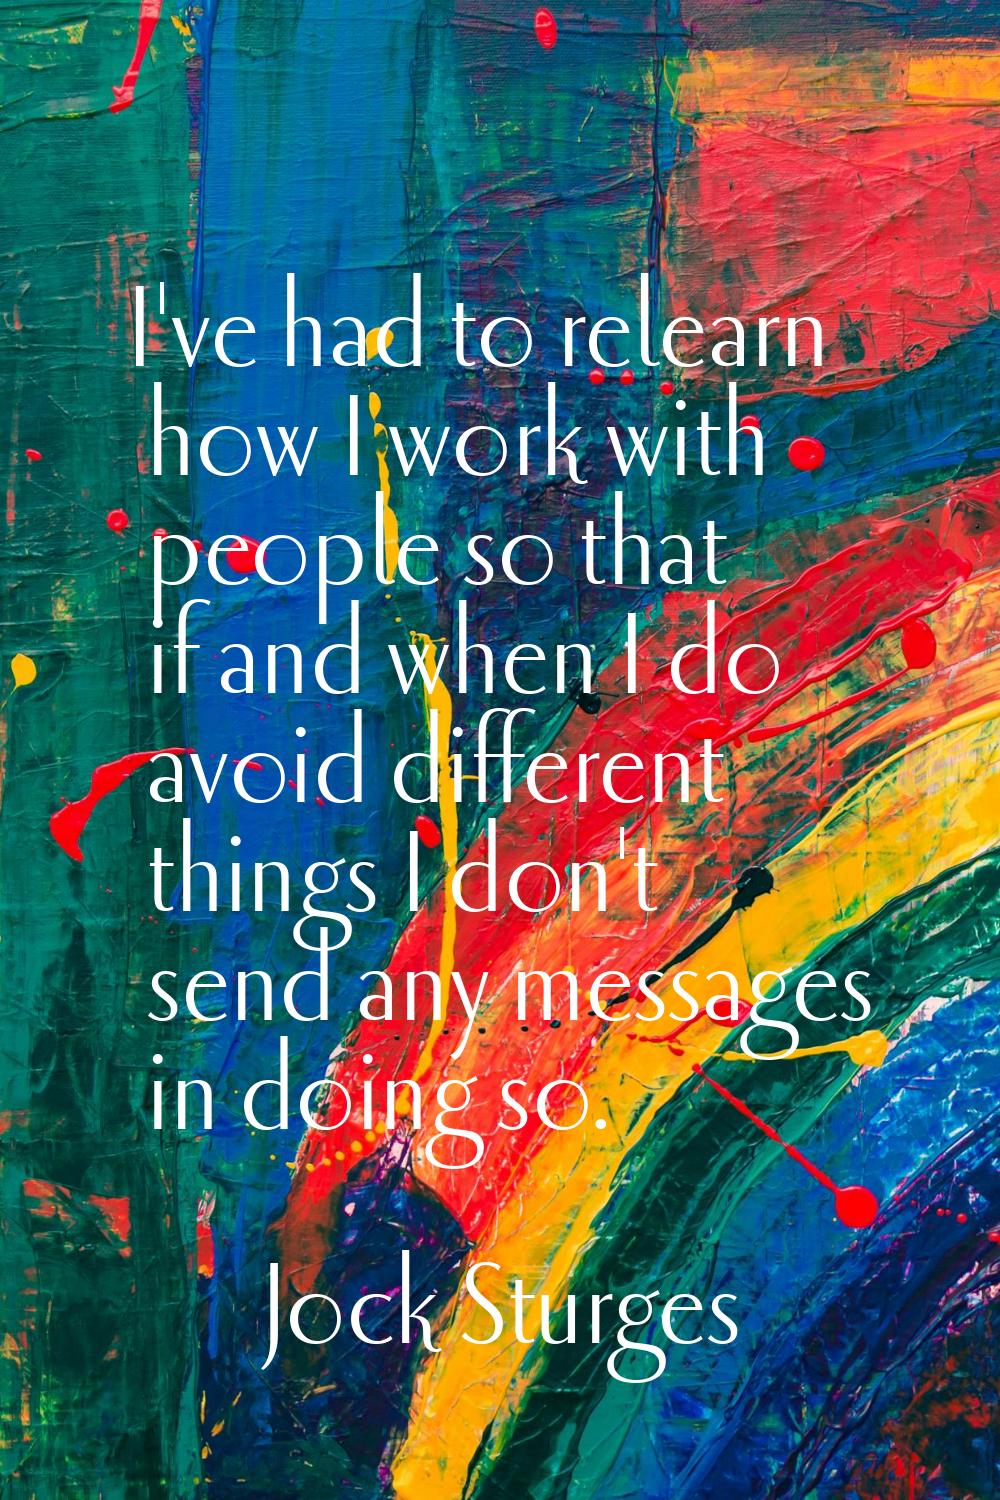 I've had to relearn how I work with people so that if and when I do avoid different things I don't 